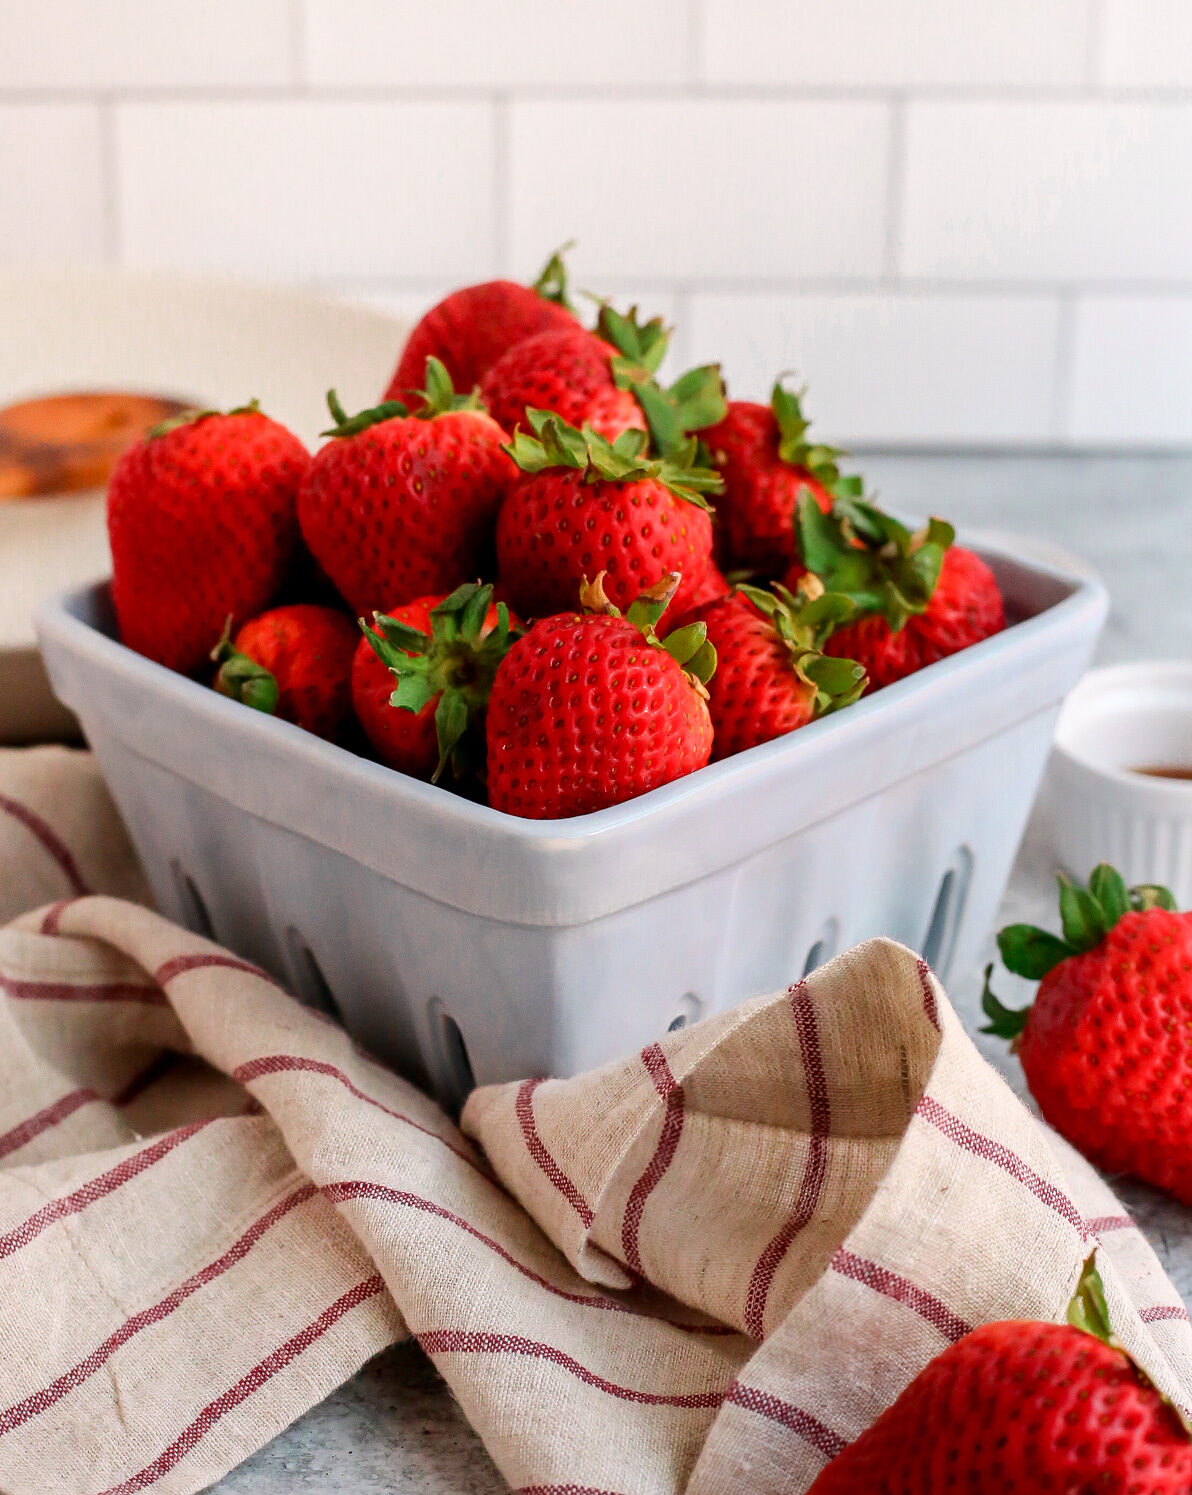 Fresh strawberries with green stems displayed in a ceramic carton on a kitchen countertop